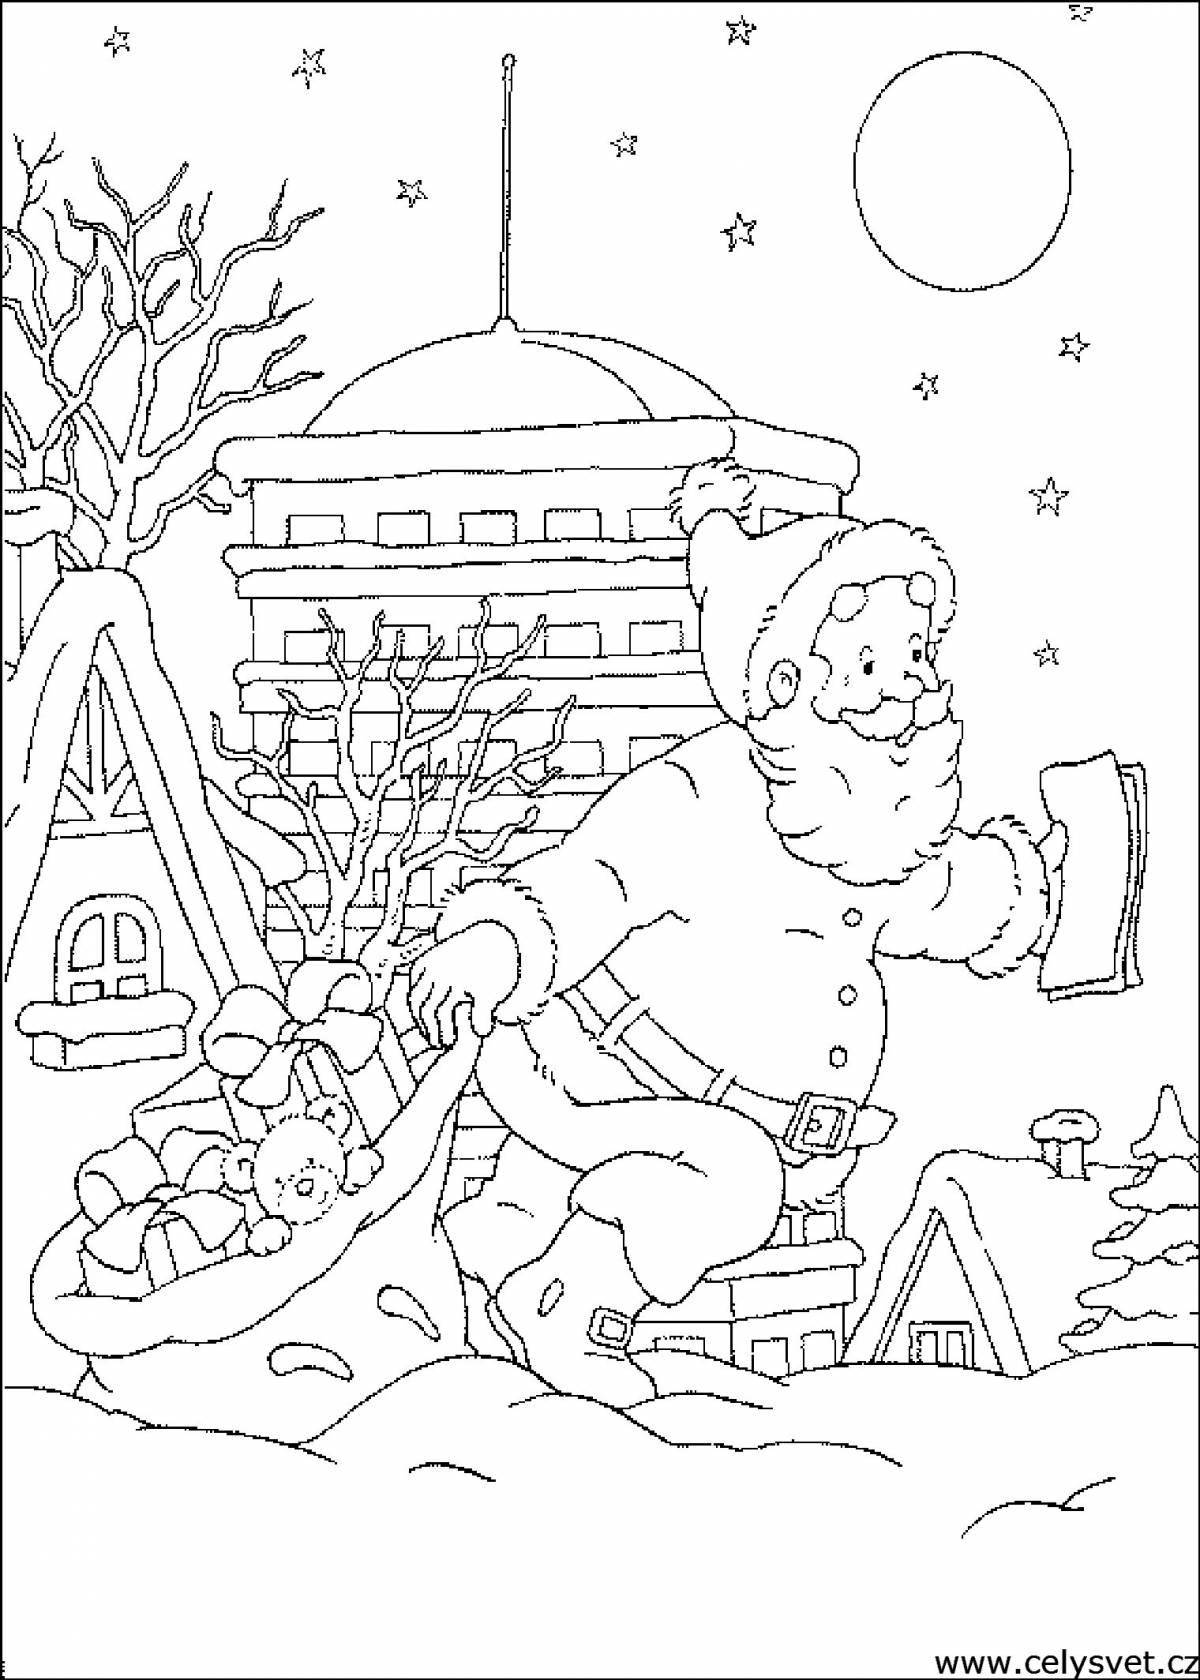 A fun Christmas coloring book for 5-6 year olds